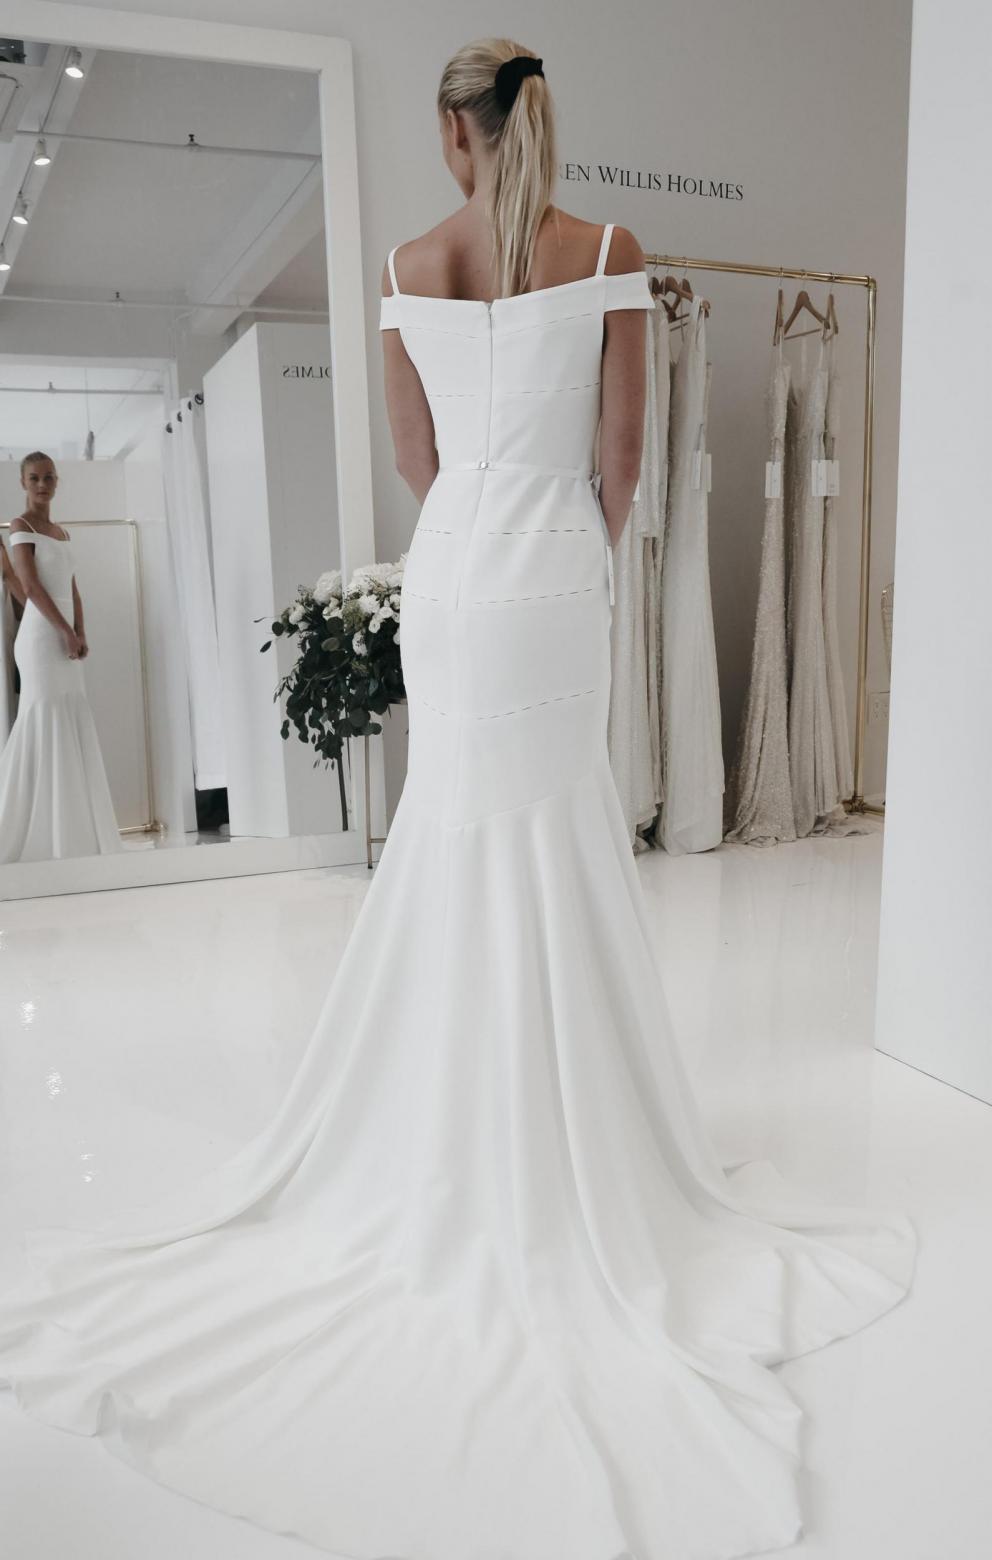 The Arianna gown by Karen Willis Holmes, nontraditional fit and flare off the shoulder wedding dress.